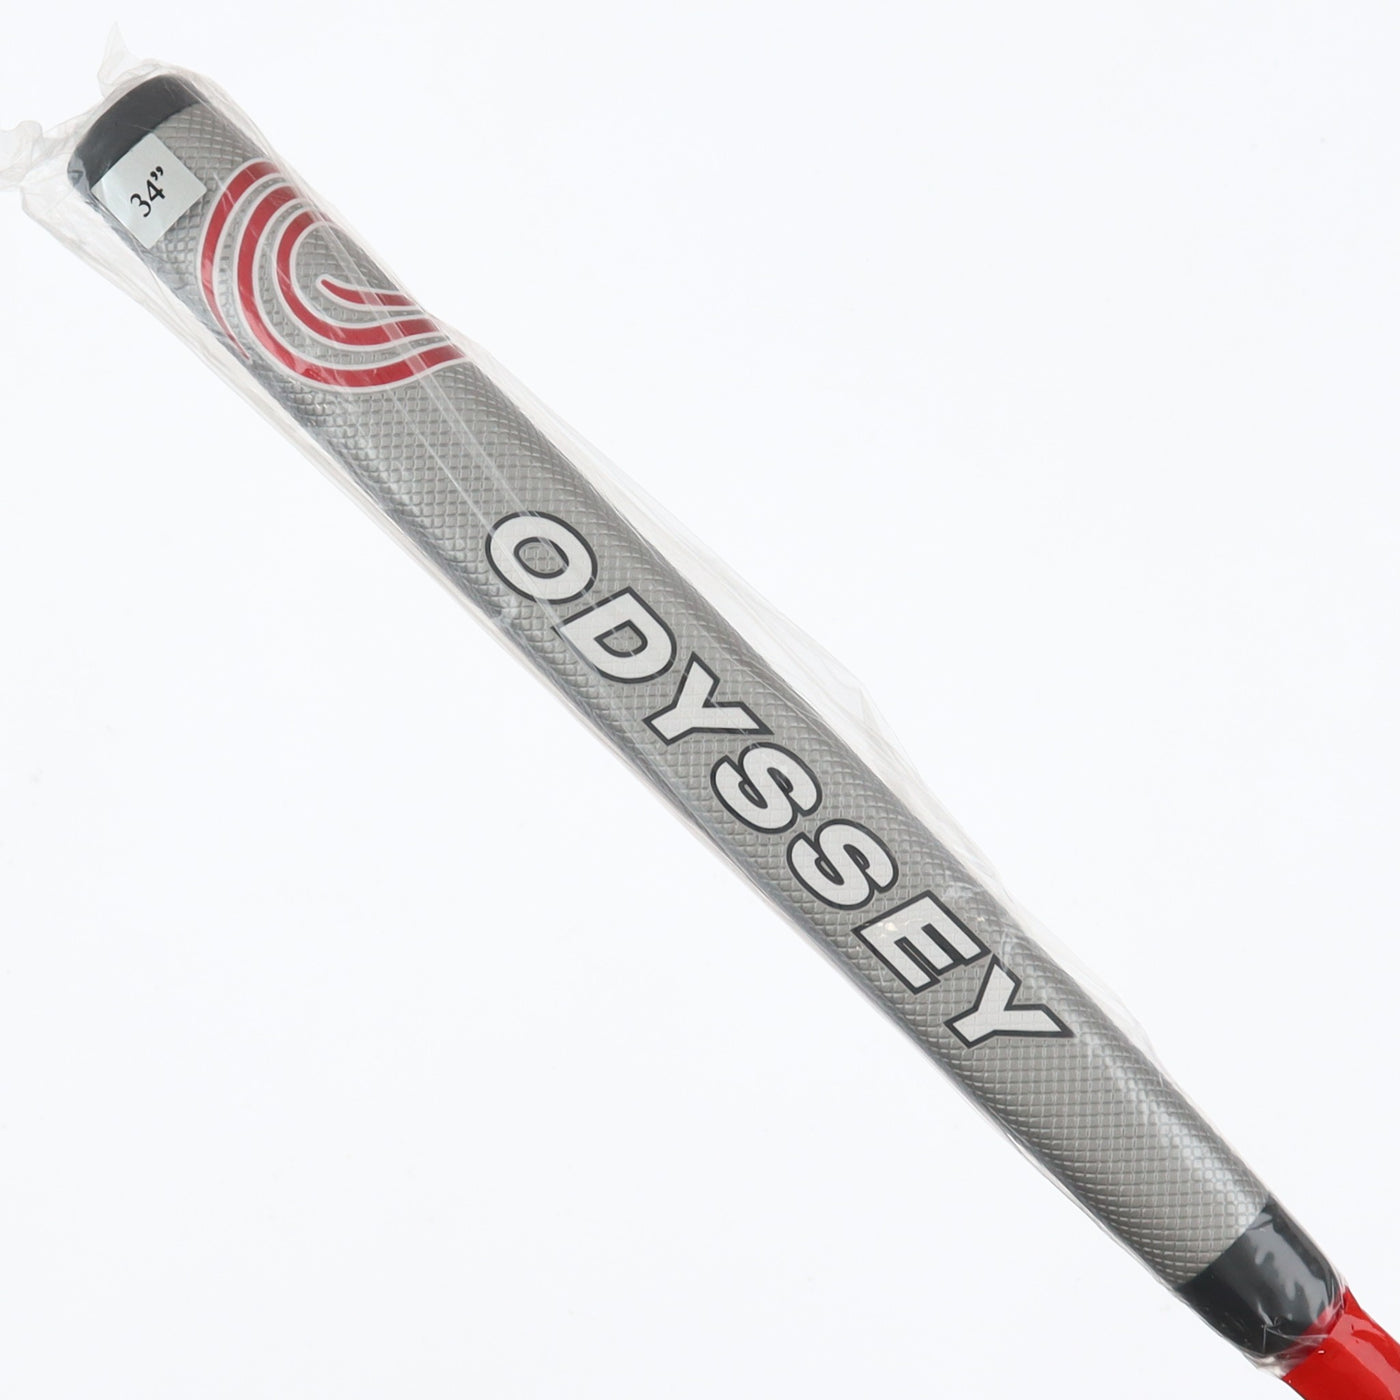 Odyssey Putter Open Box Left-Handed 2-BALL ELEVEN TOUR LINED 34 inch